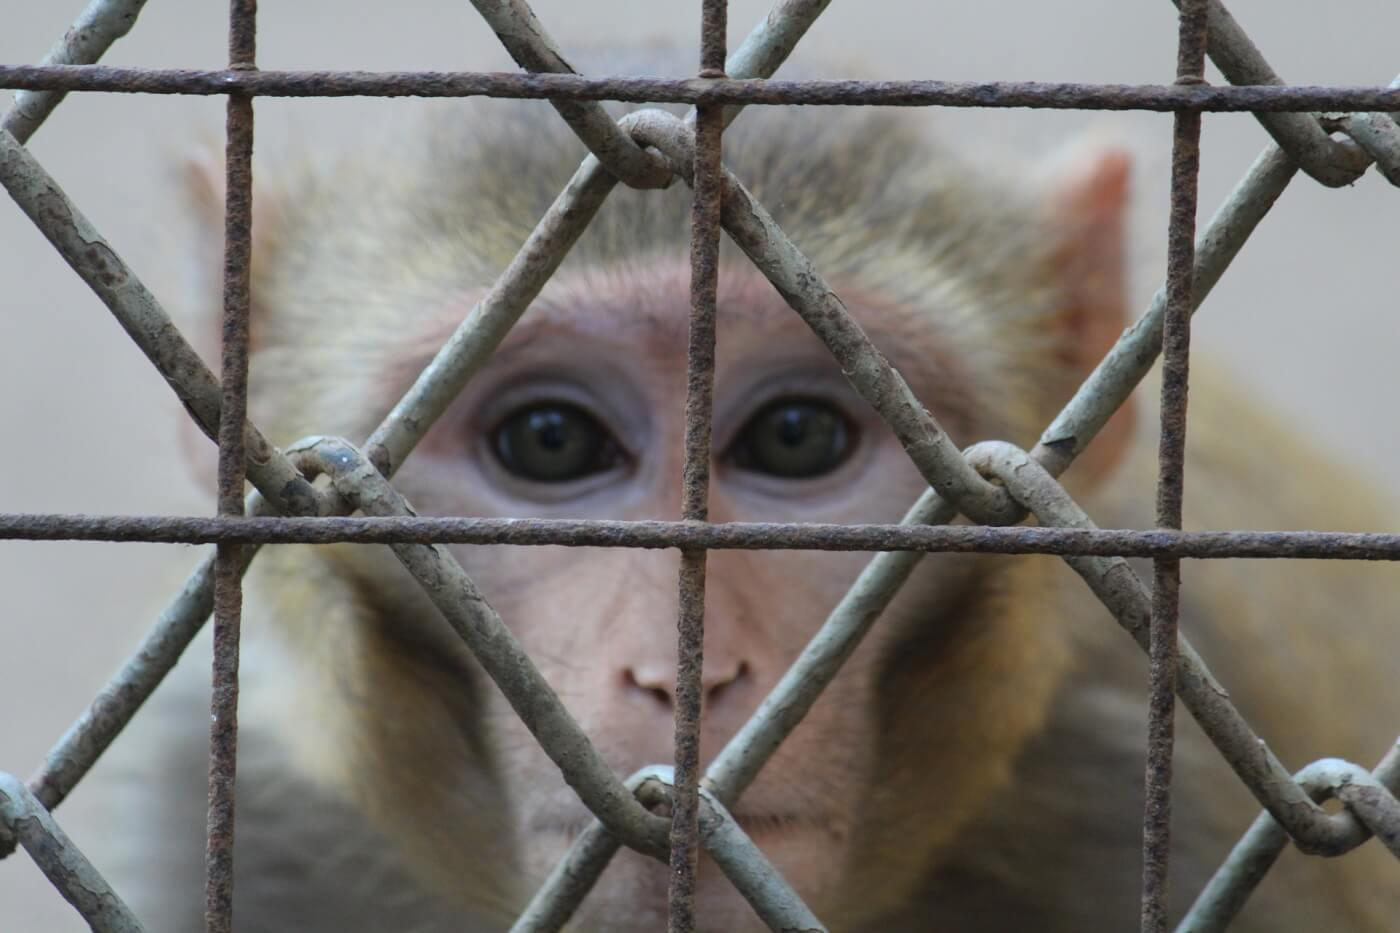 help monkeys and other primates used for experiments and entertainment